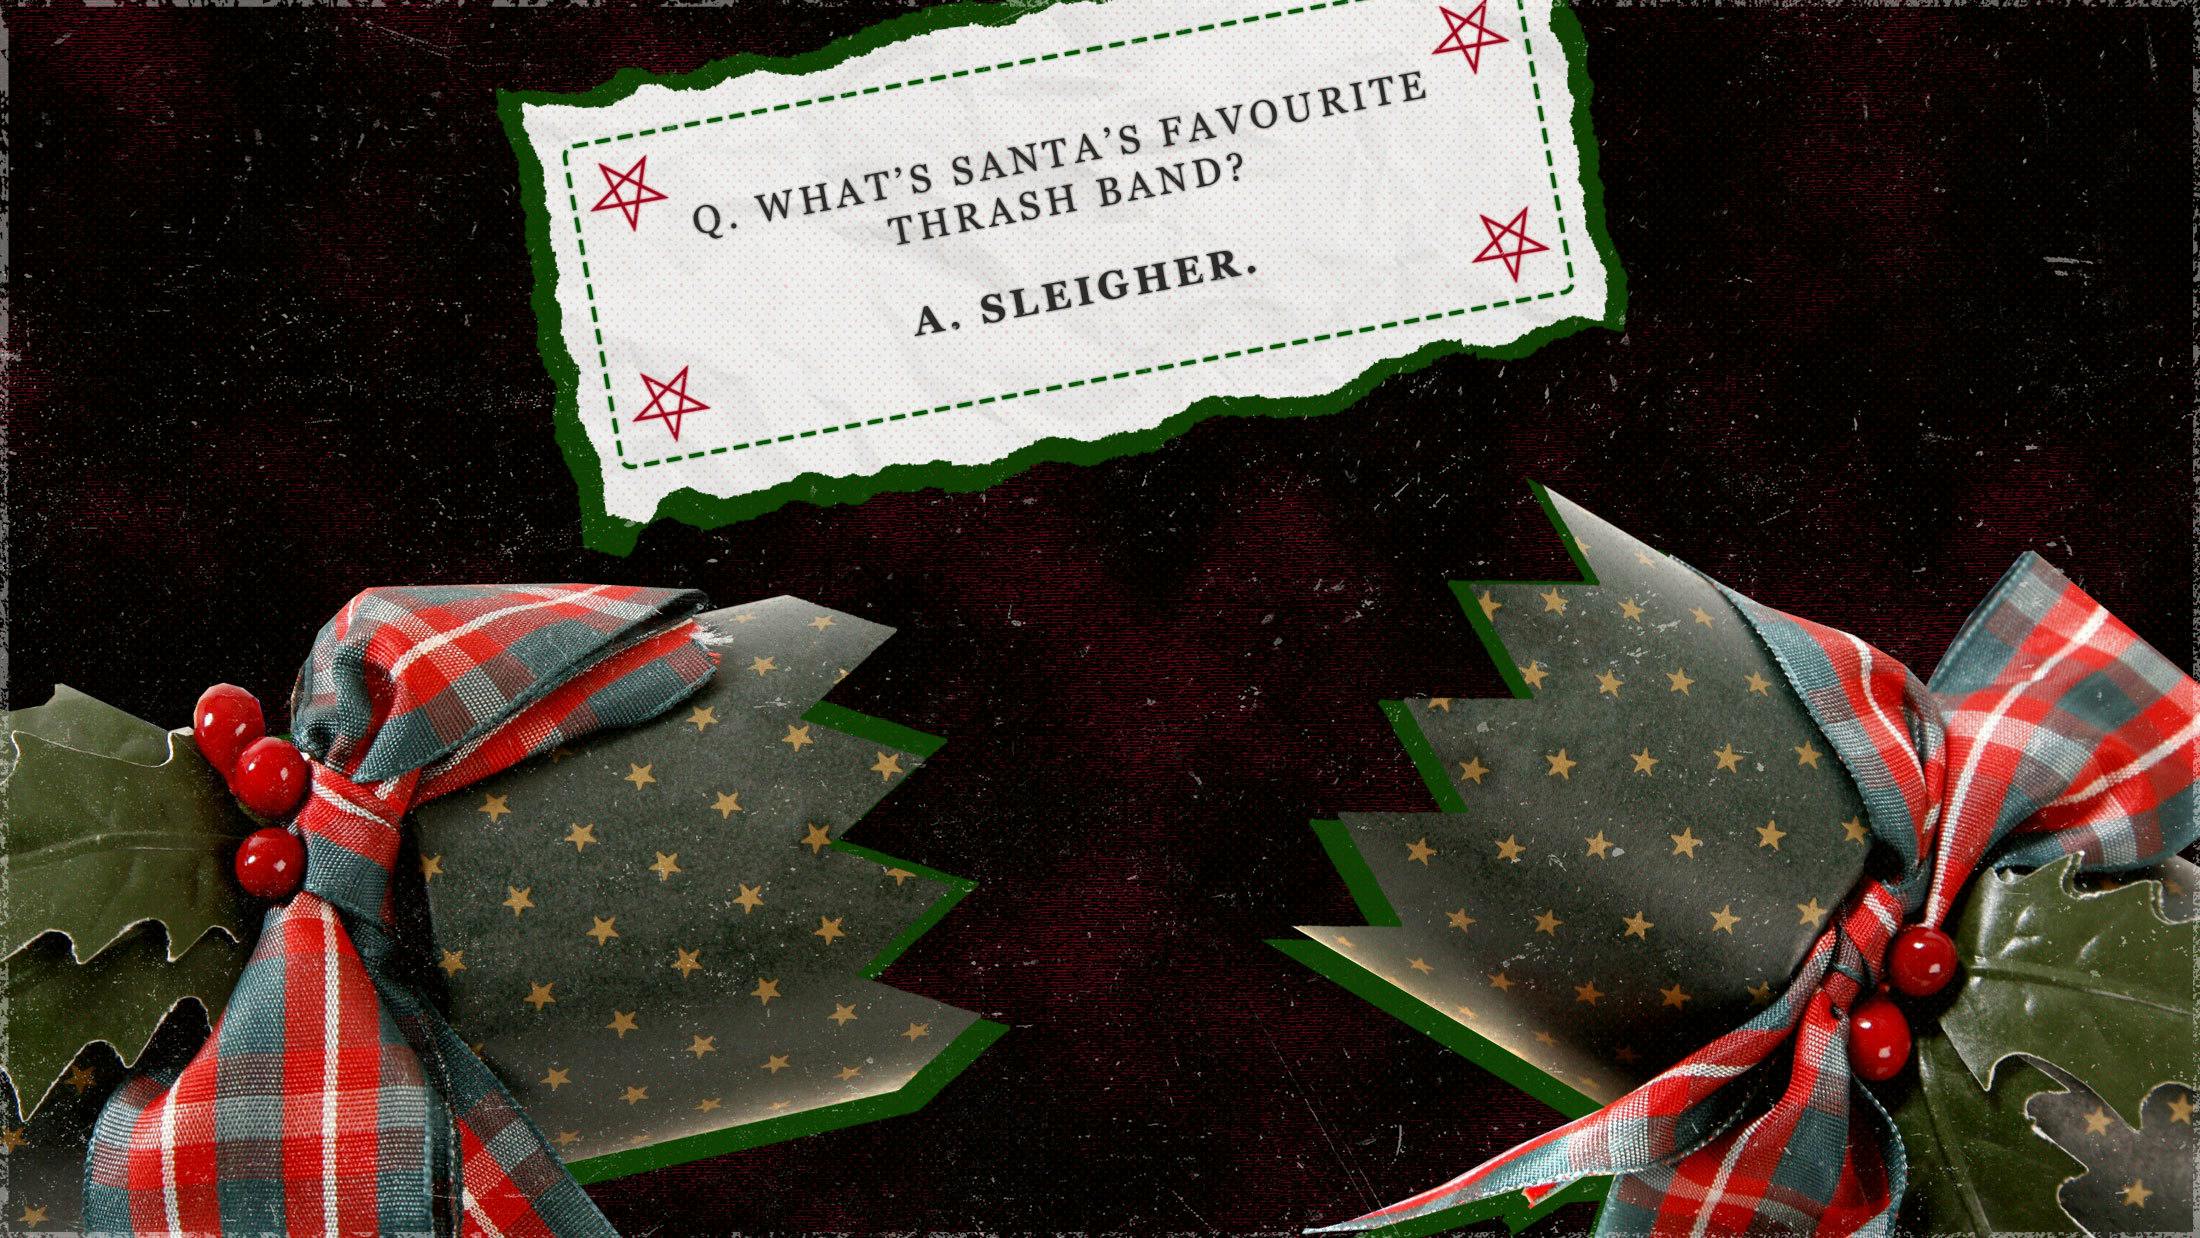 21 crap jokes about rock music to replace the crap jokes in your Christmas cracker